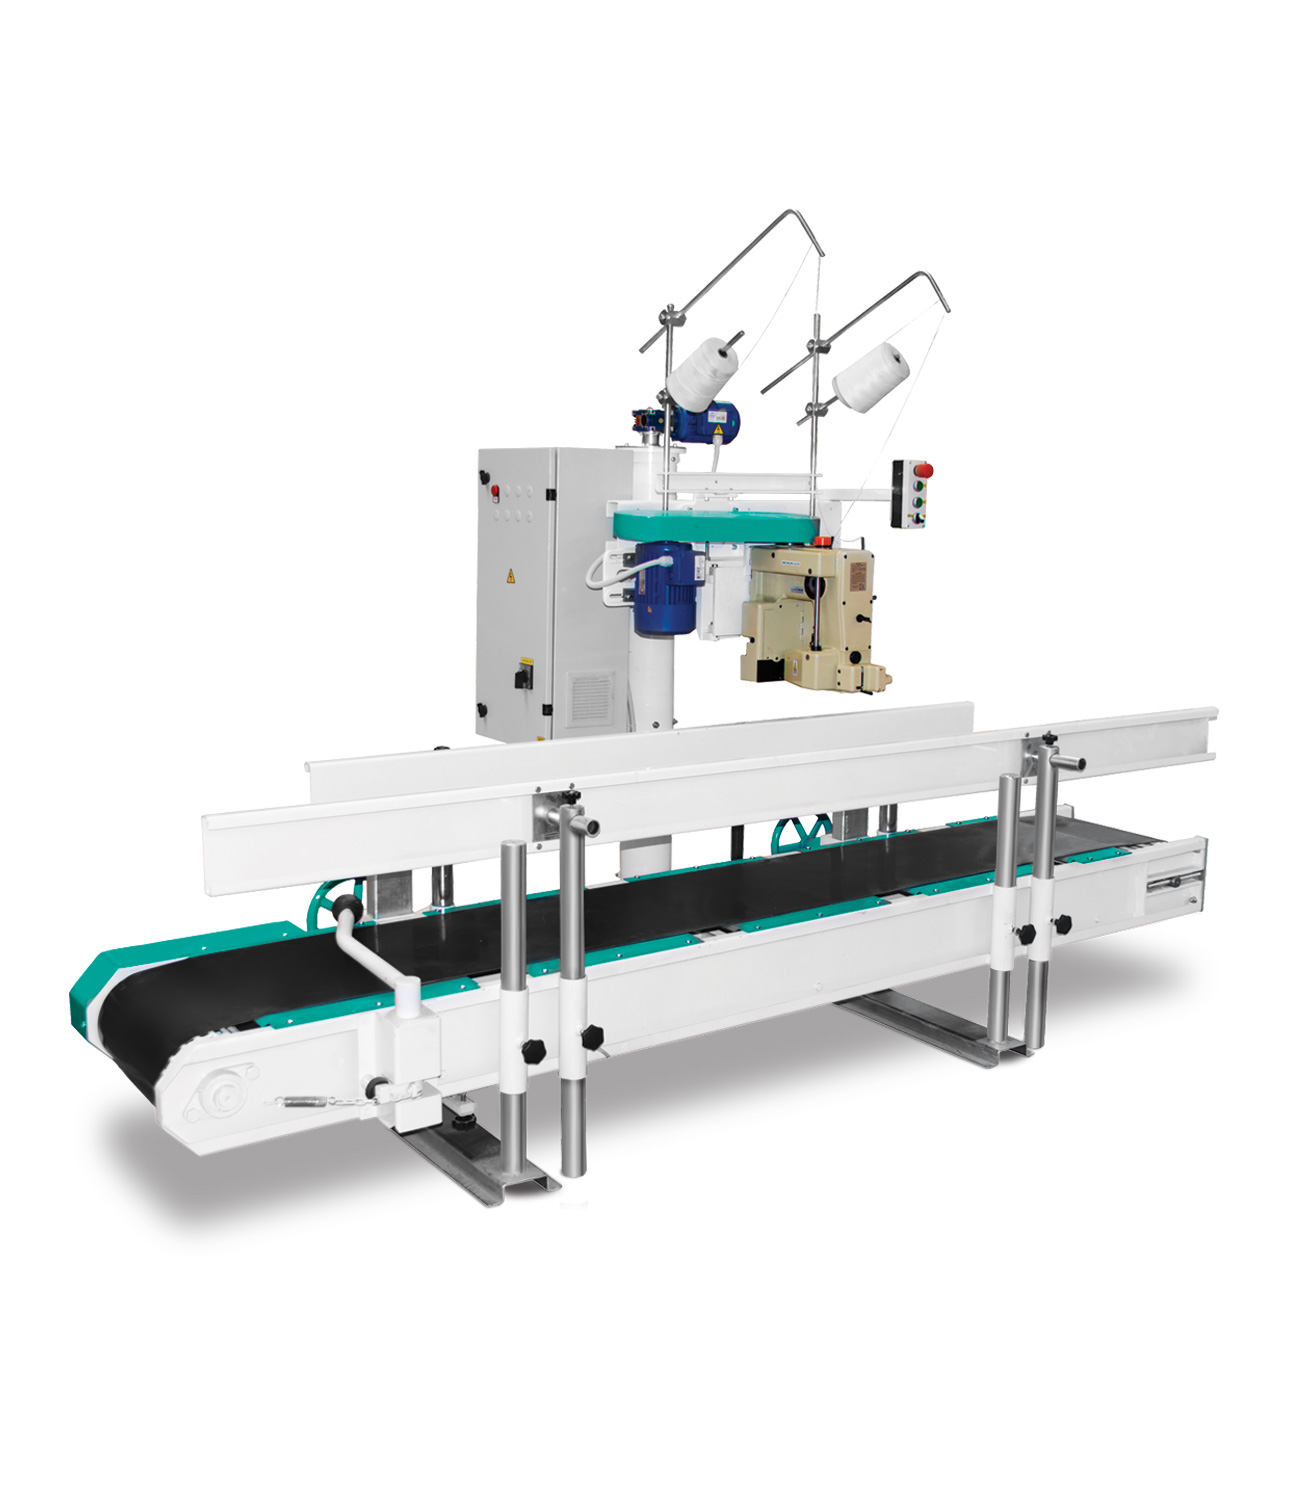 Flour Bagging Machine System With Double Weigh Hopper & Single Station 5/10 Kg Detail 1